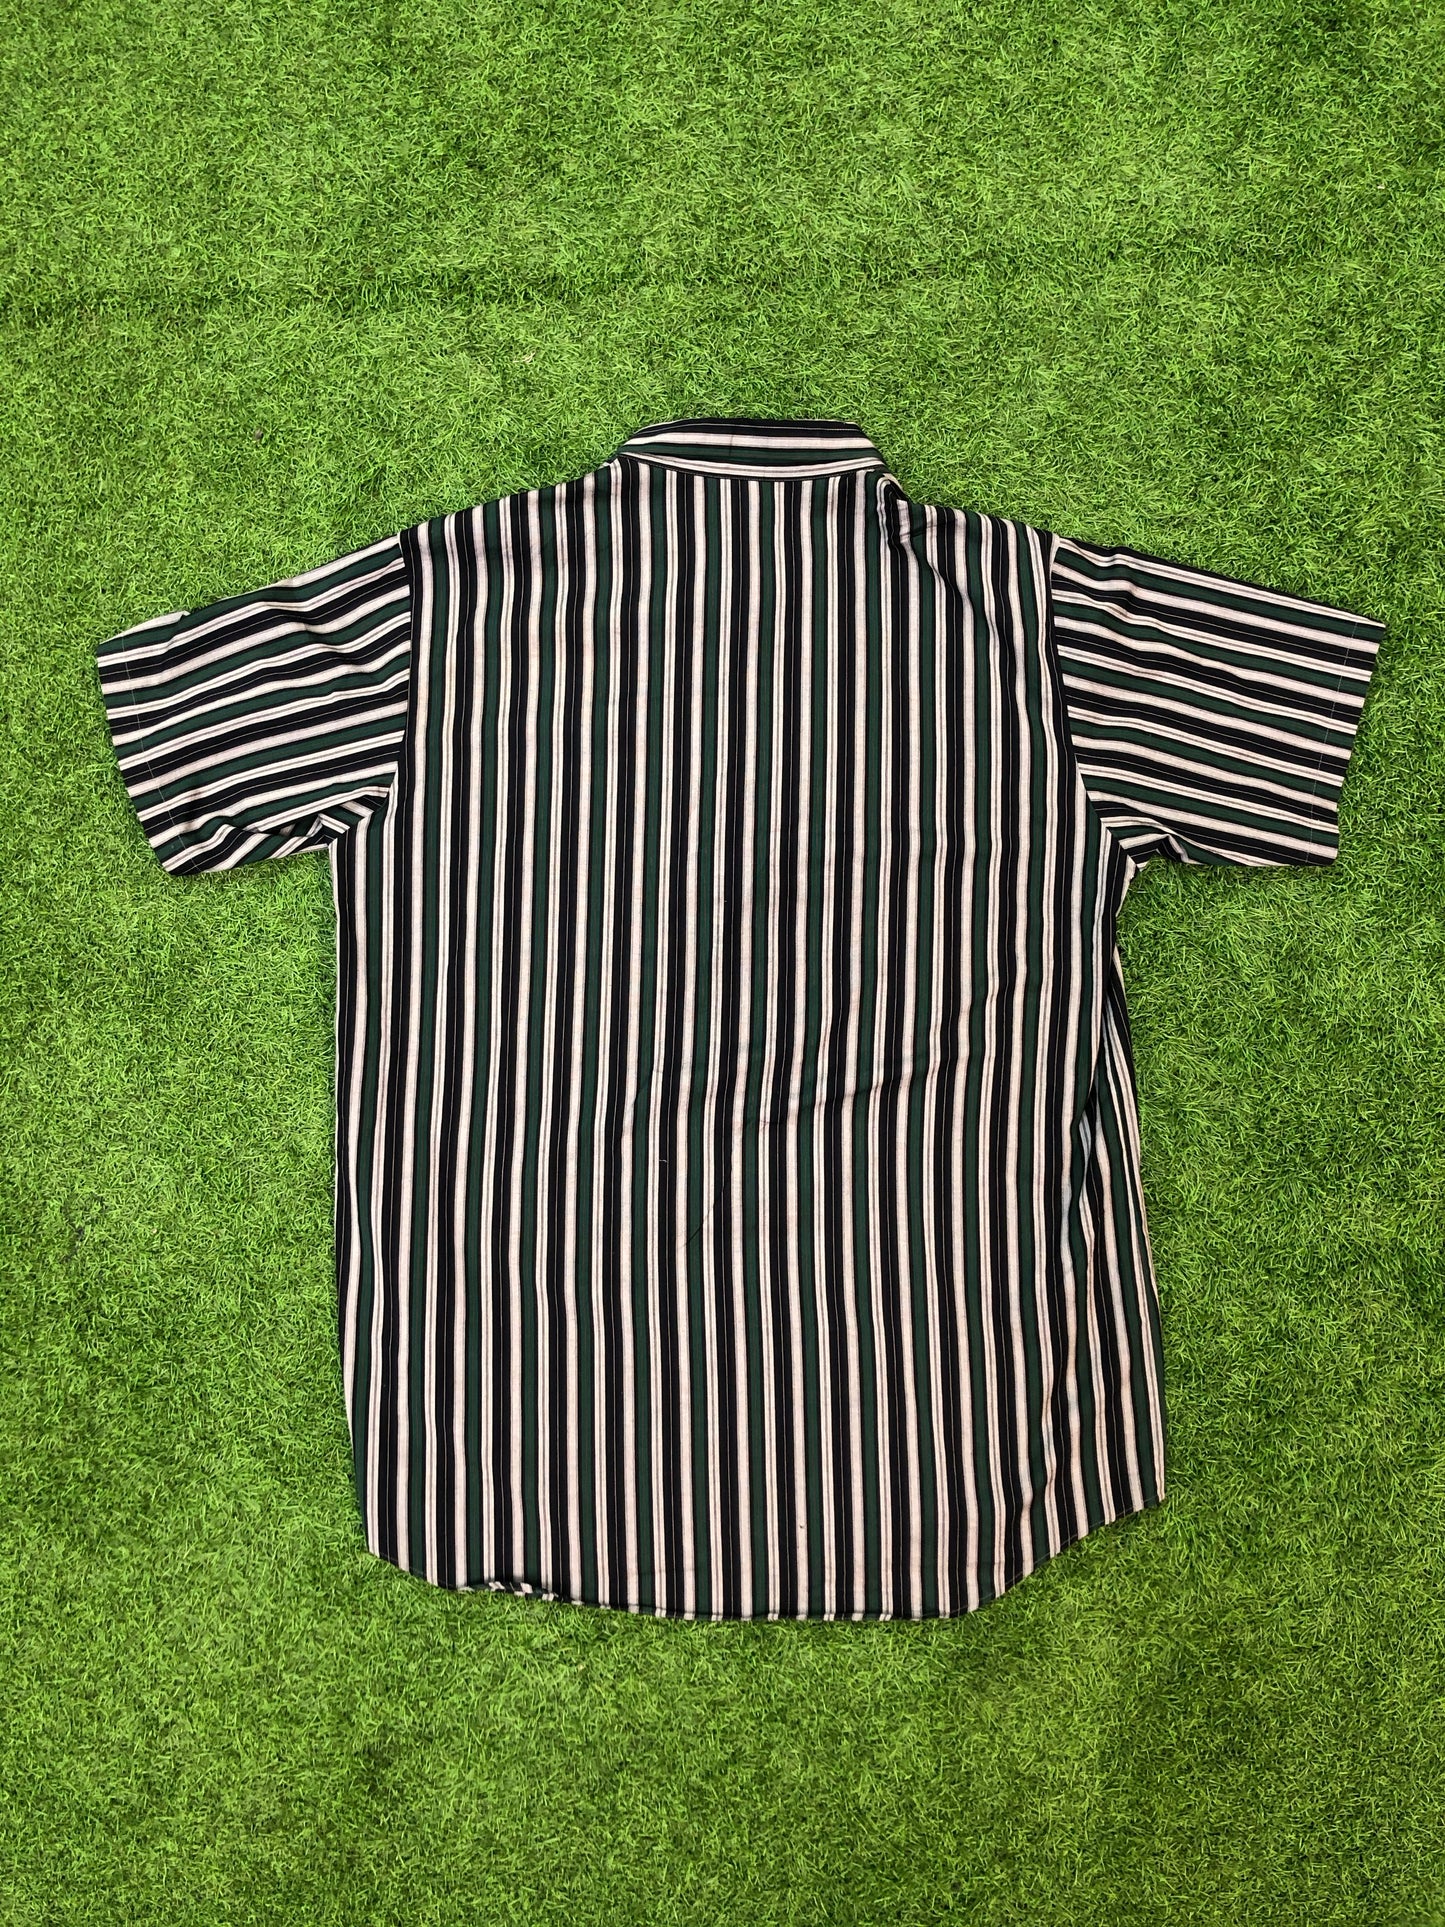 03' Undercover Crap Striped Button Up